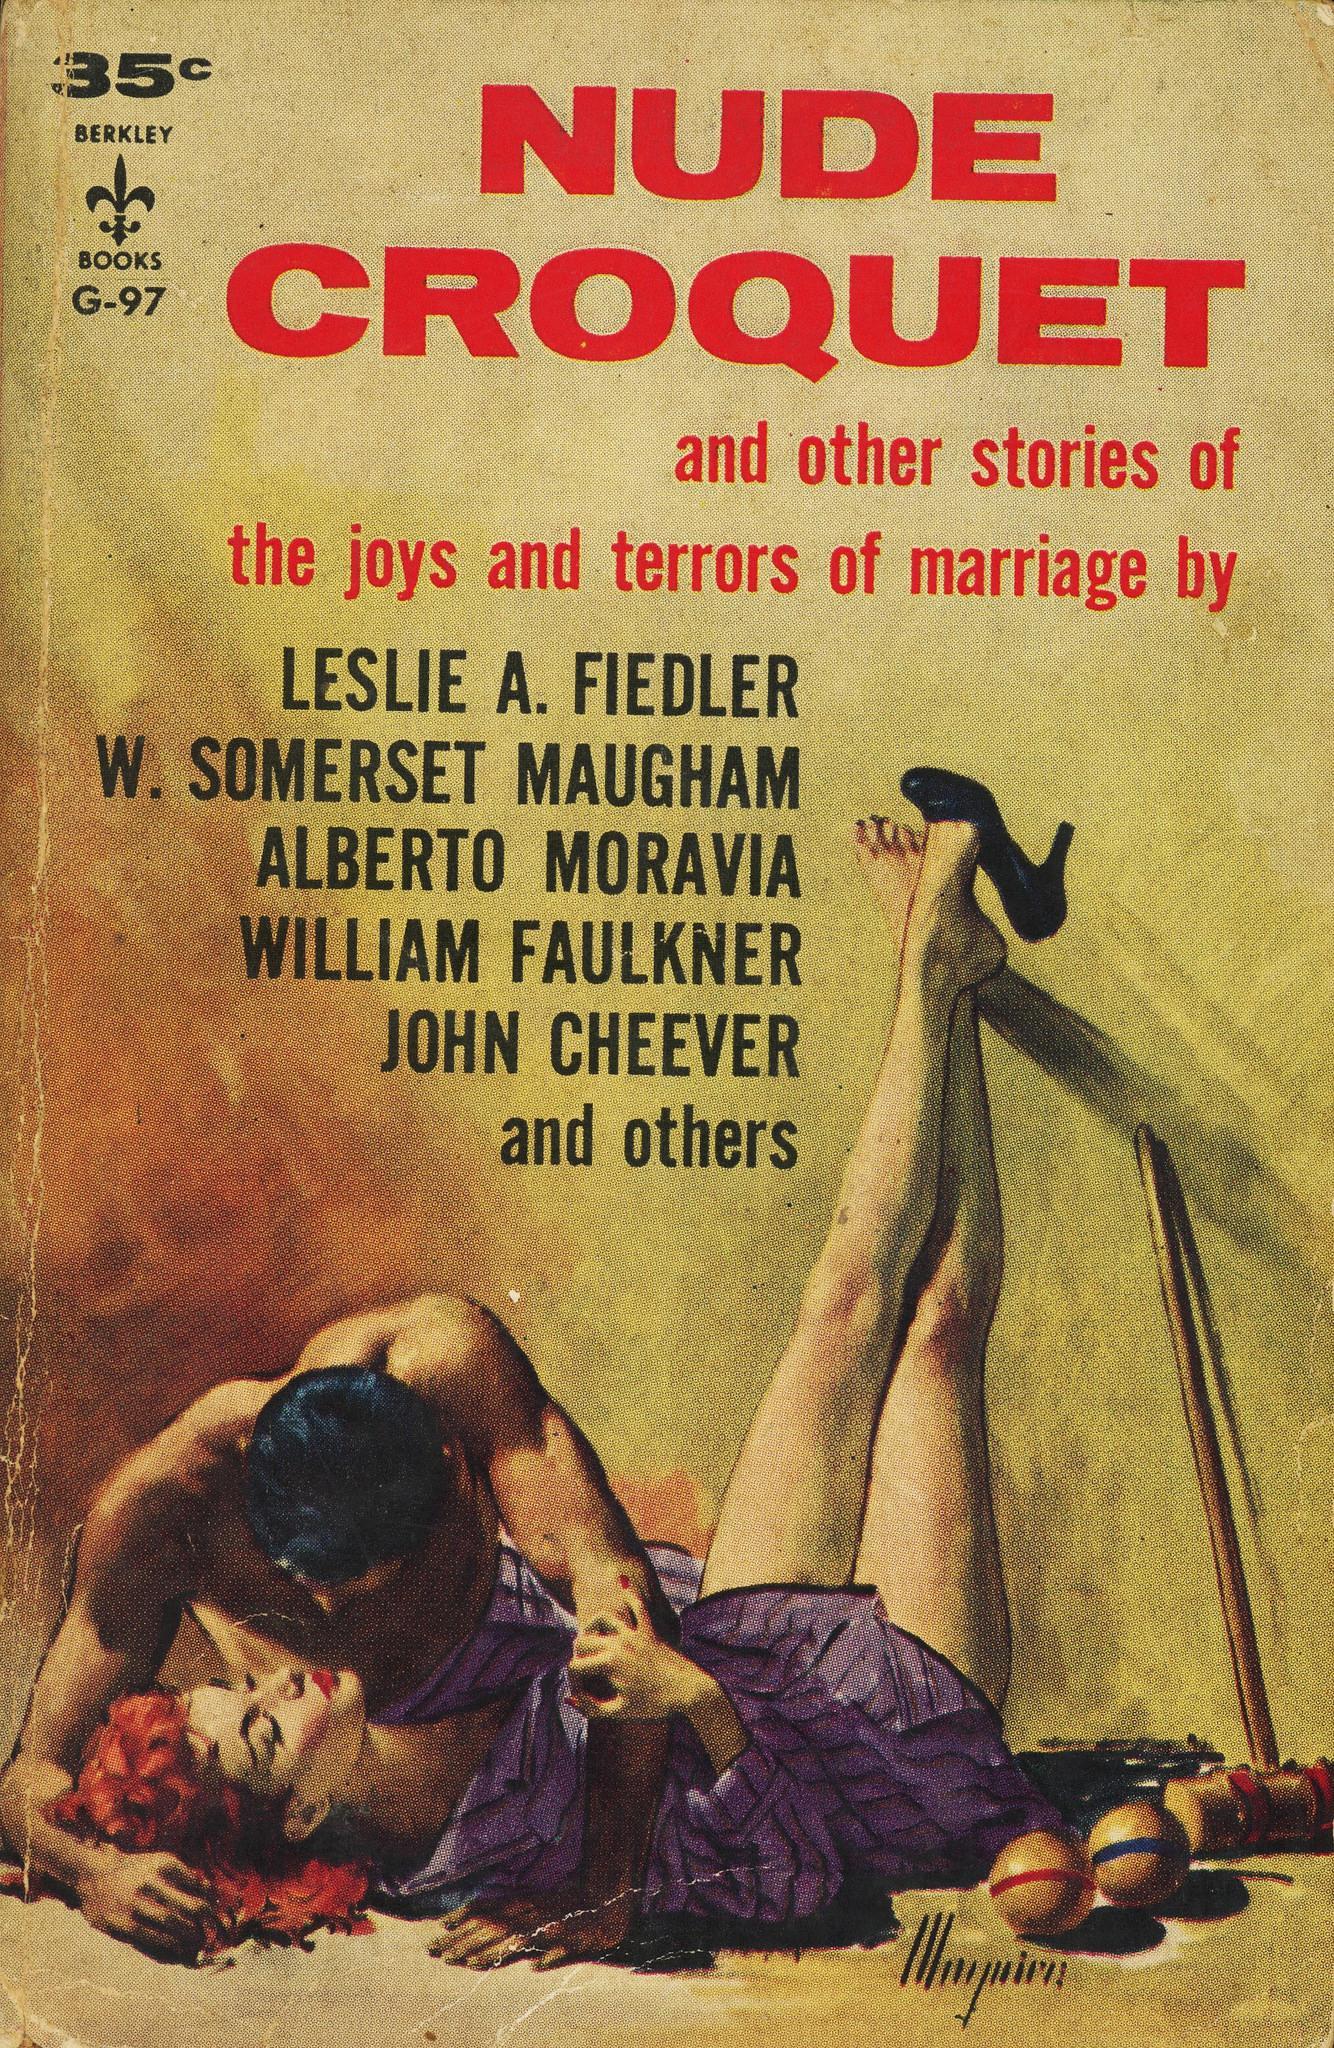 21 Fantastic Pulp Fiction Book Titles From The Mid 20th